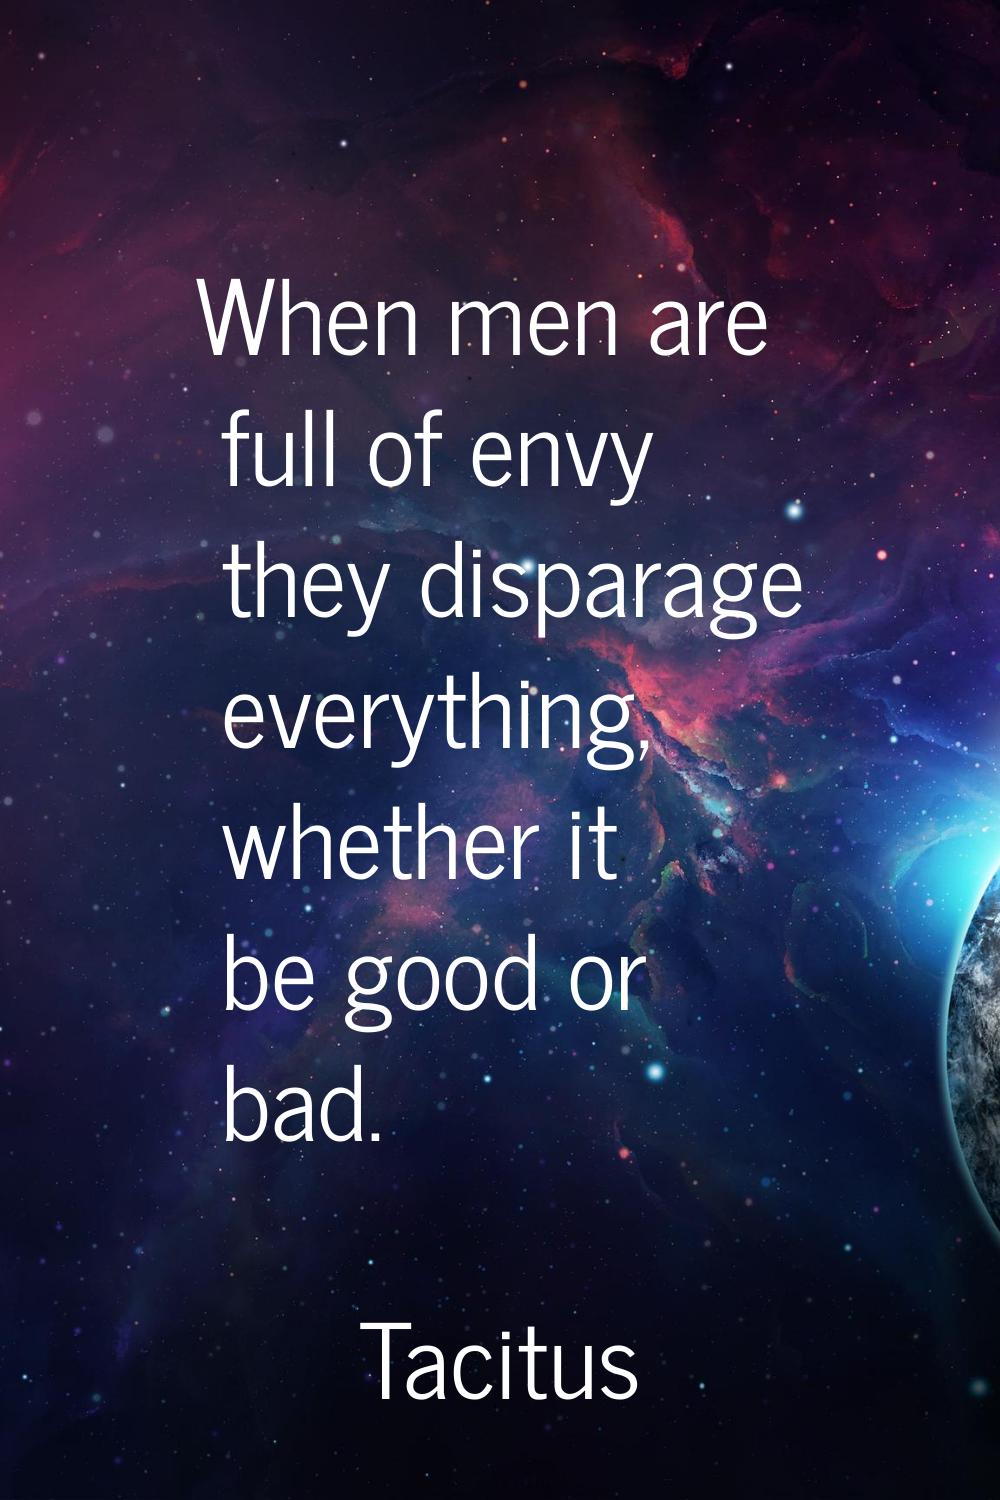 When men are full of envy they disparage everything, whether it be good or bad.